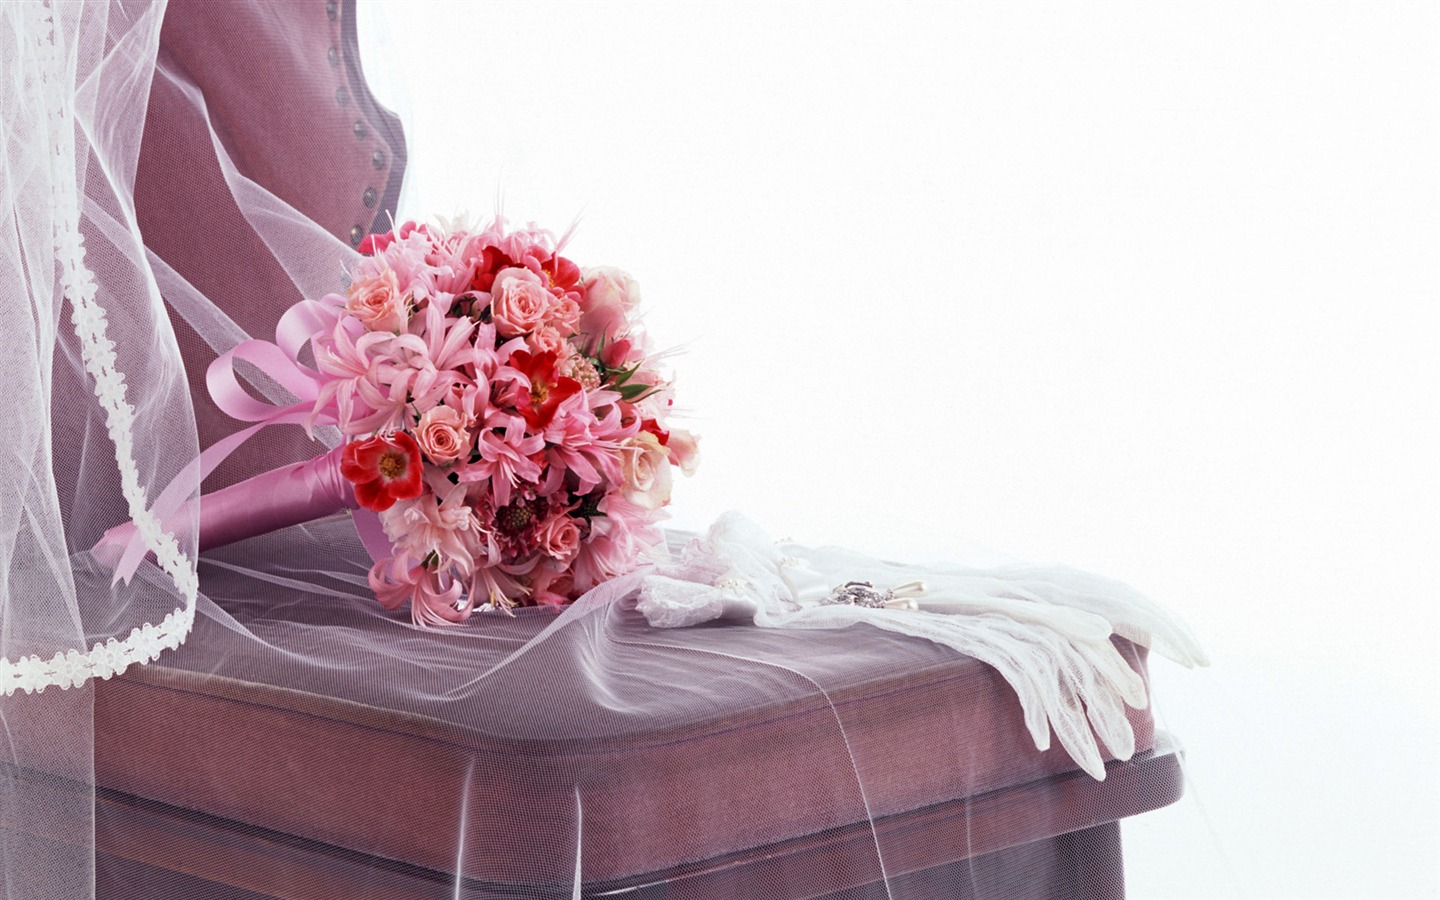 Weddings and Flowers wallpaper (1) #8 - 1440x900